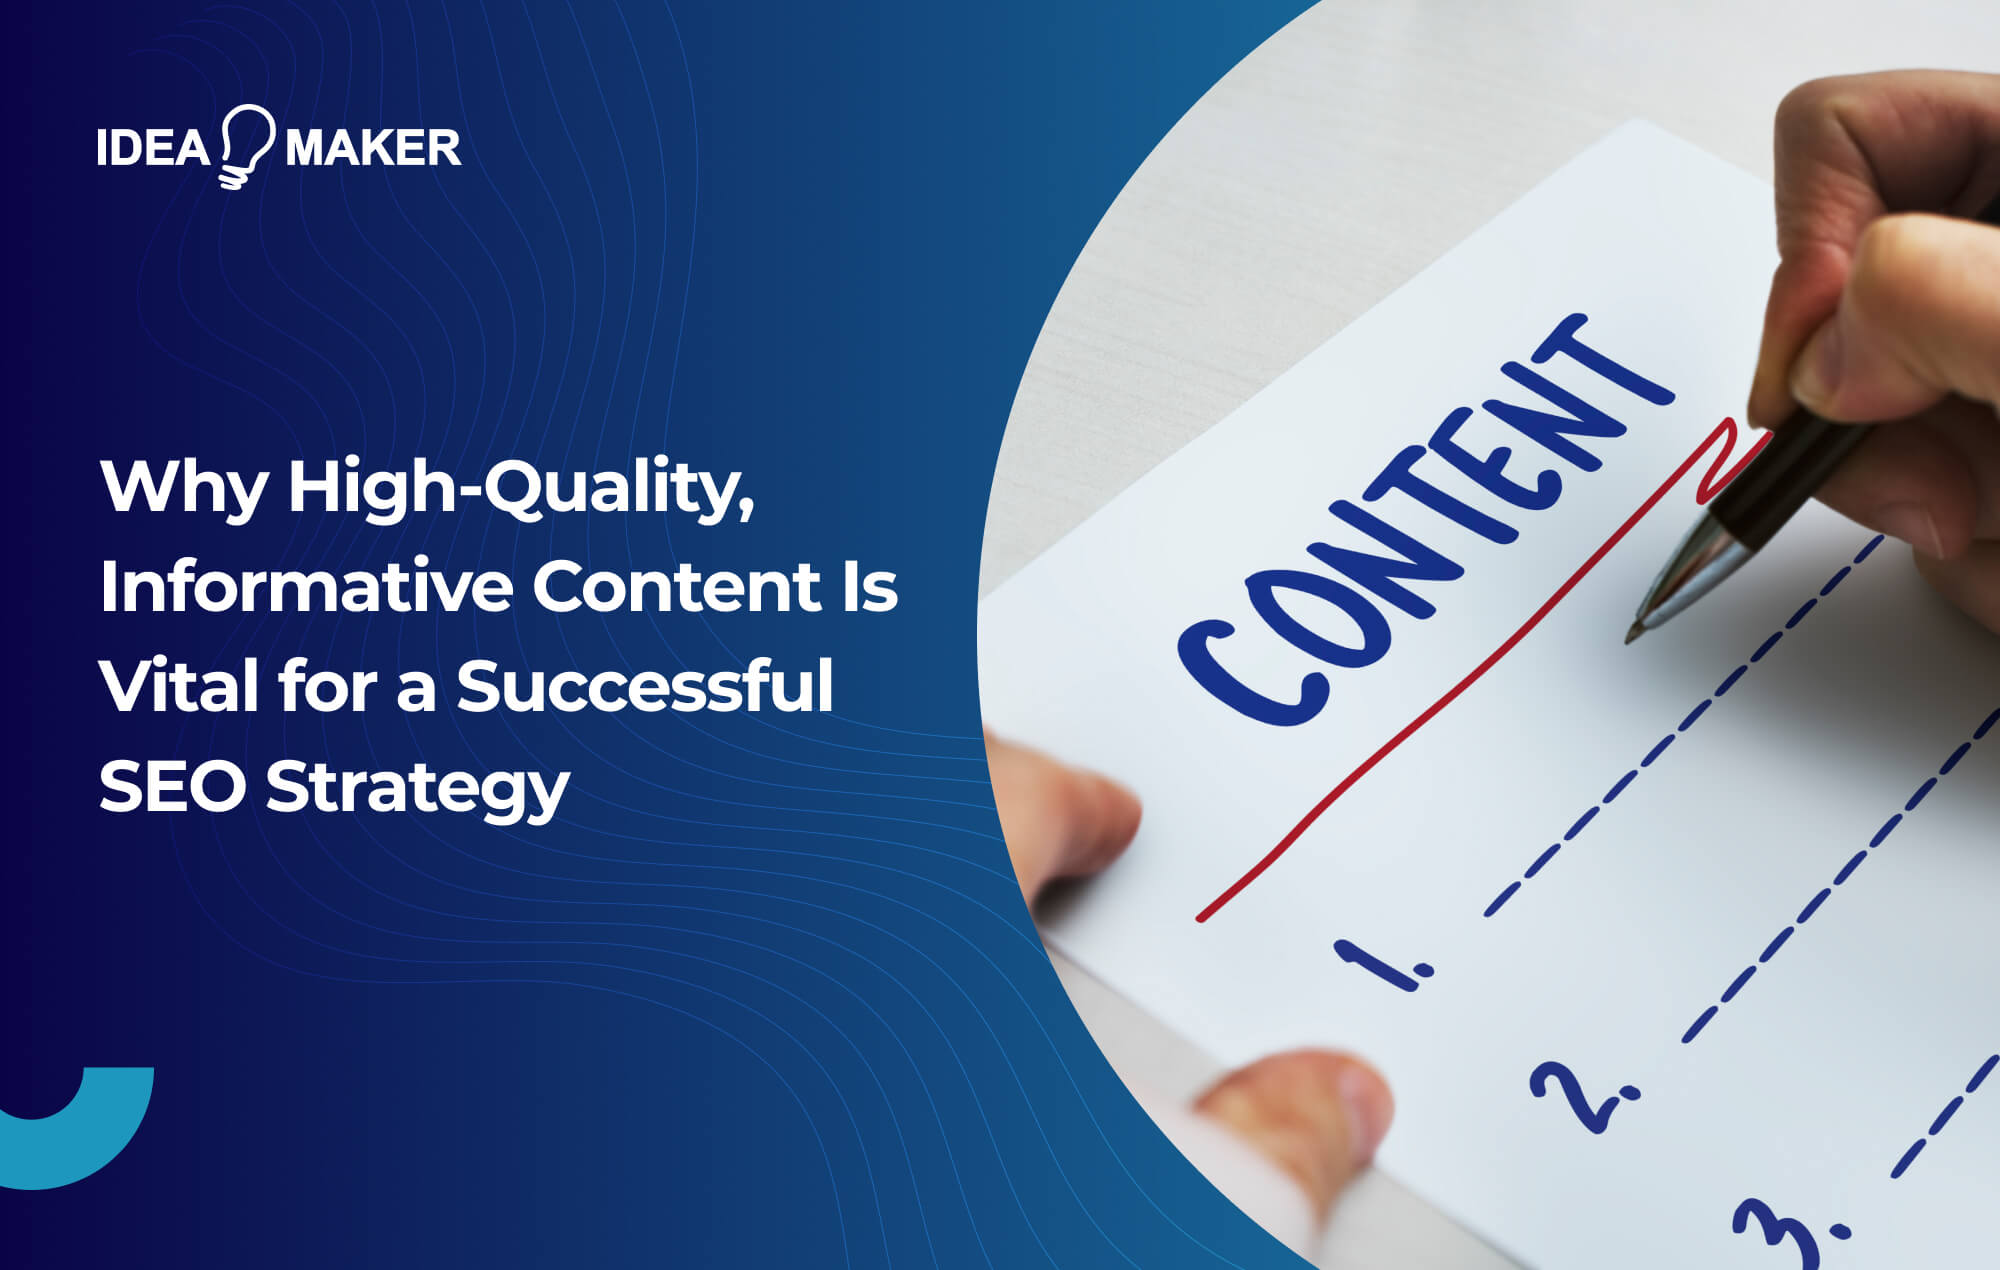 Ideamaker - Why High-Quality, Informative Content Is Vital for a Successful SEO Strategy